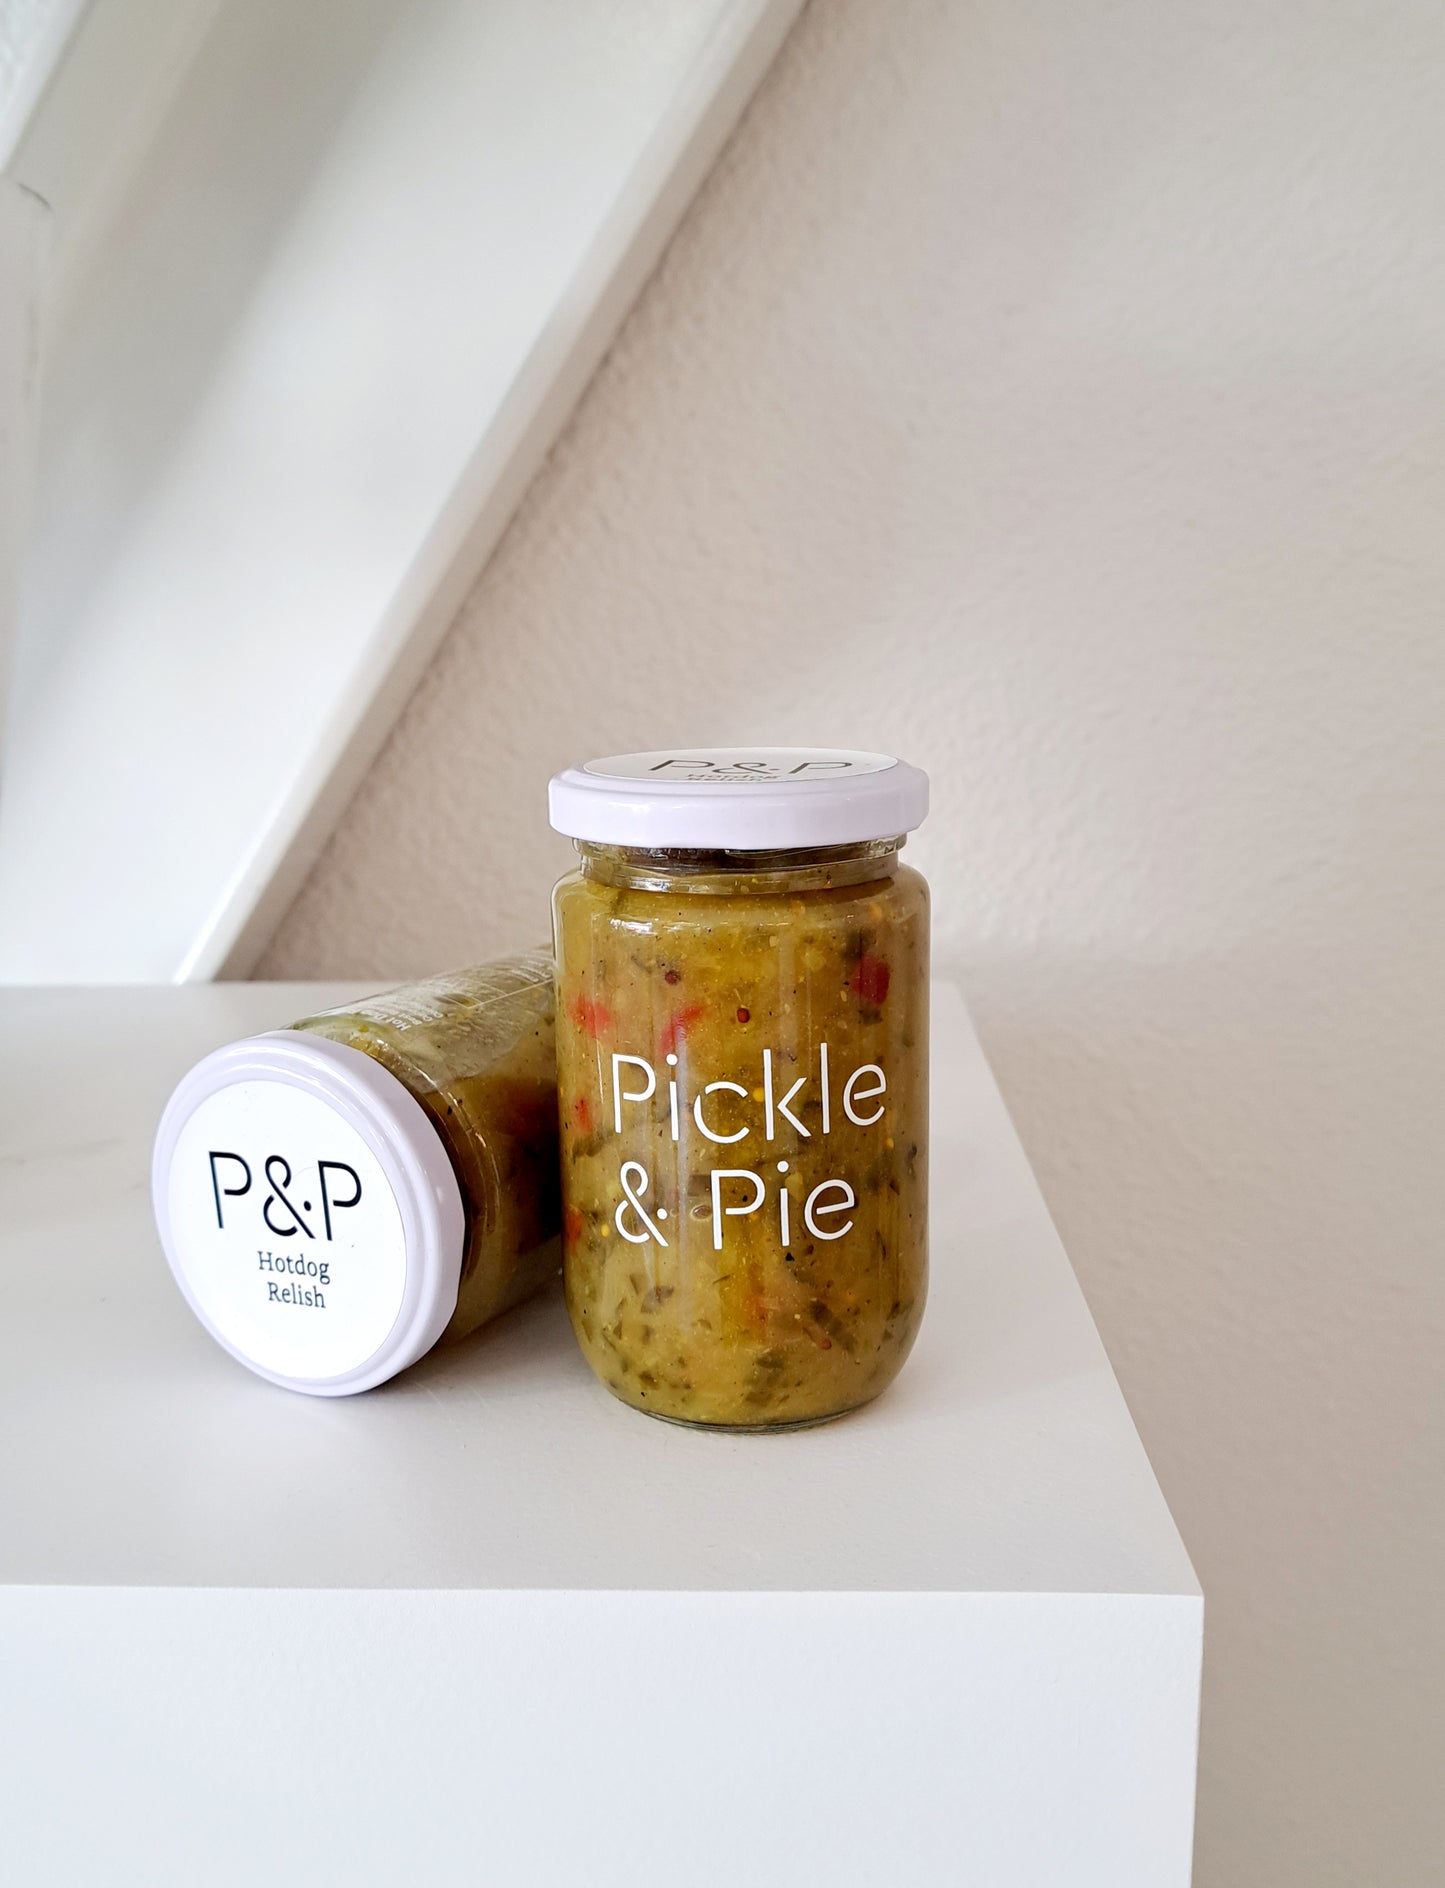 Pickle & Pie | Hot dog relish